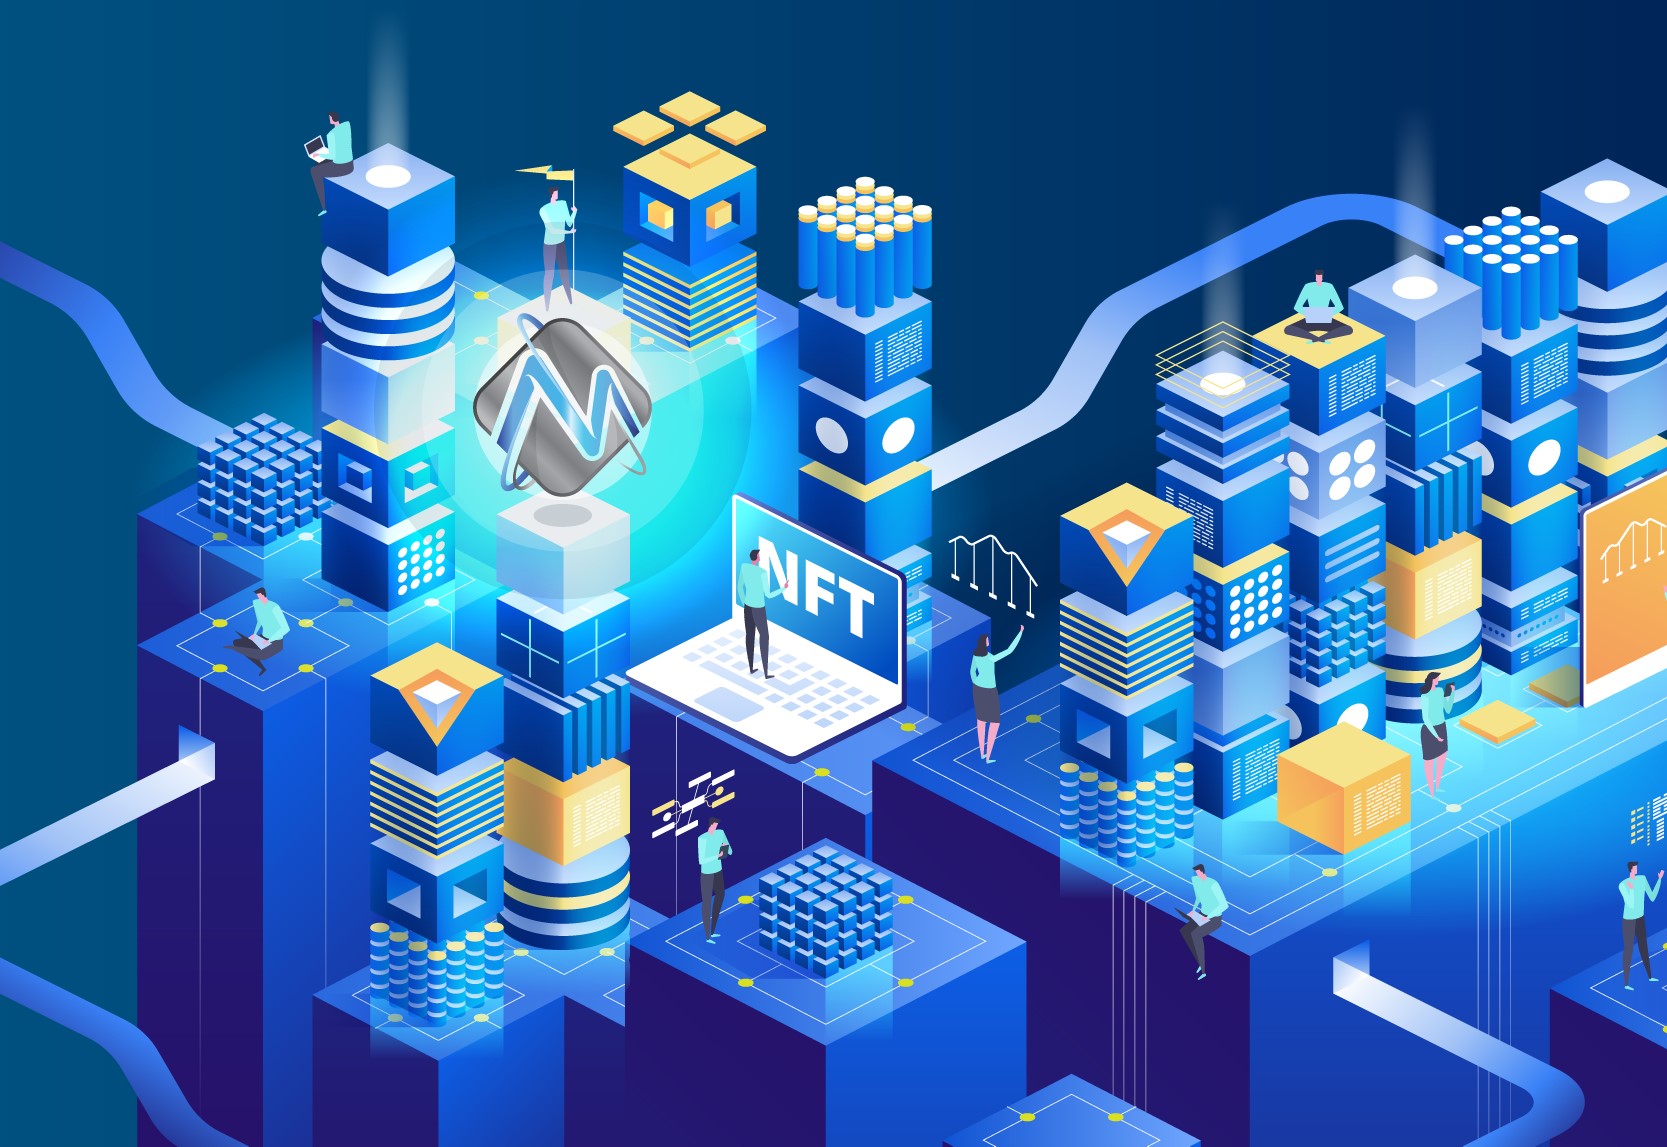 MetaDeFi: The Most Powerful NFT DeFi Platform In the Ecosystem